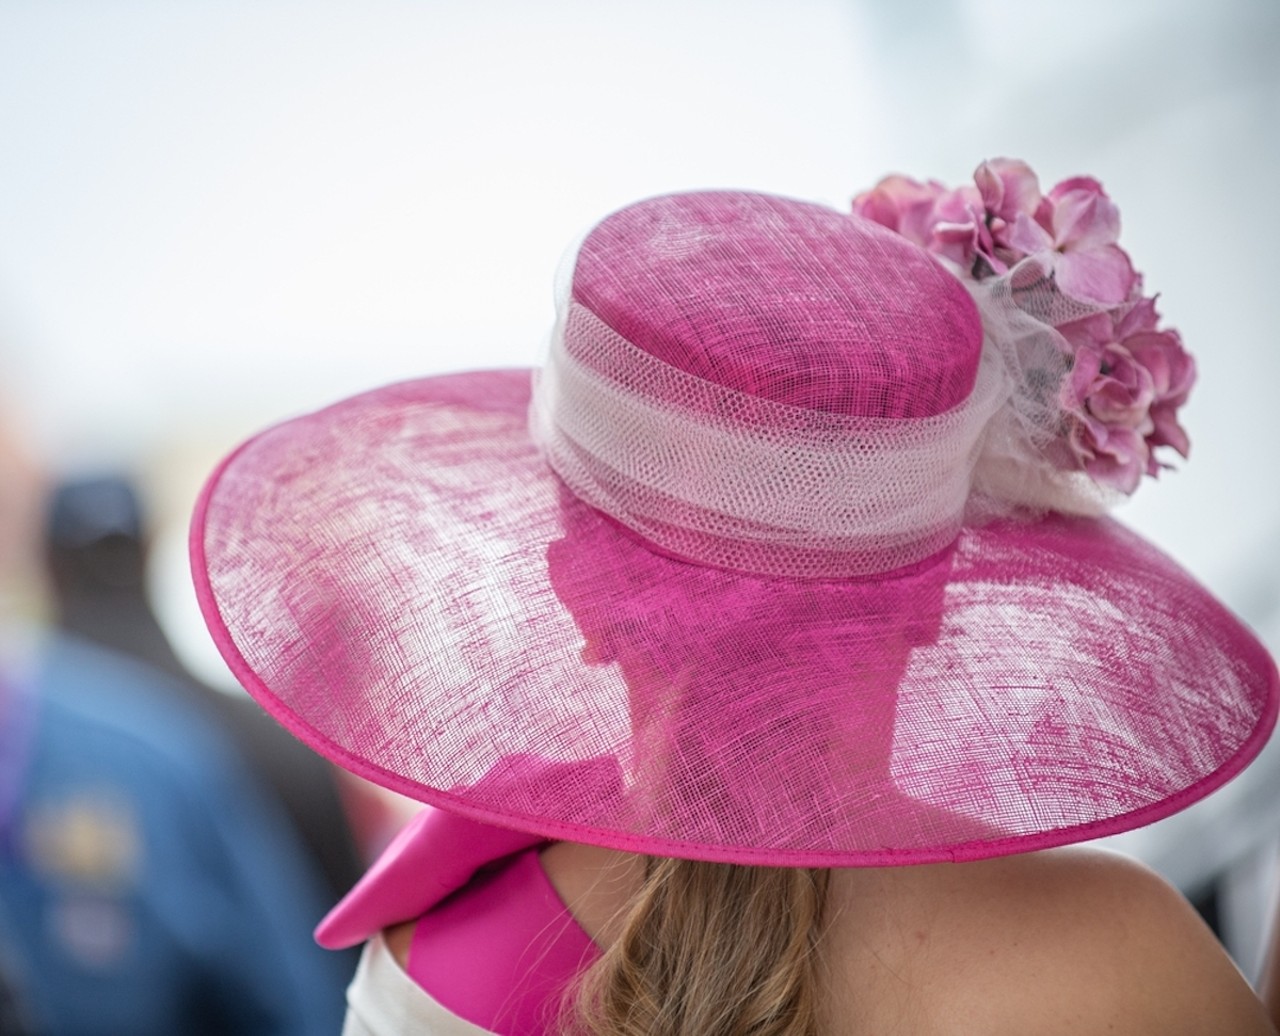 The Derby At Fueled Collective
When: May 4 from 3-8 p.m.
Where: Fueled Collective Cincinnati, Norwood
What: Watch the 150th Kentucky Derby at the Fueled Collective.
Who: Fueled Collective Cincinnati
Why: Drink, dine and wear your wildest fascinator while you cheer on the horsies.